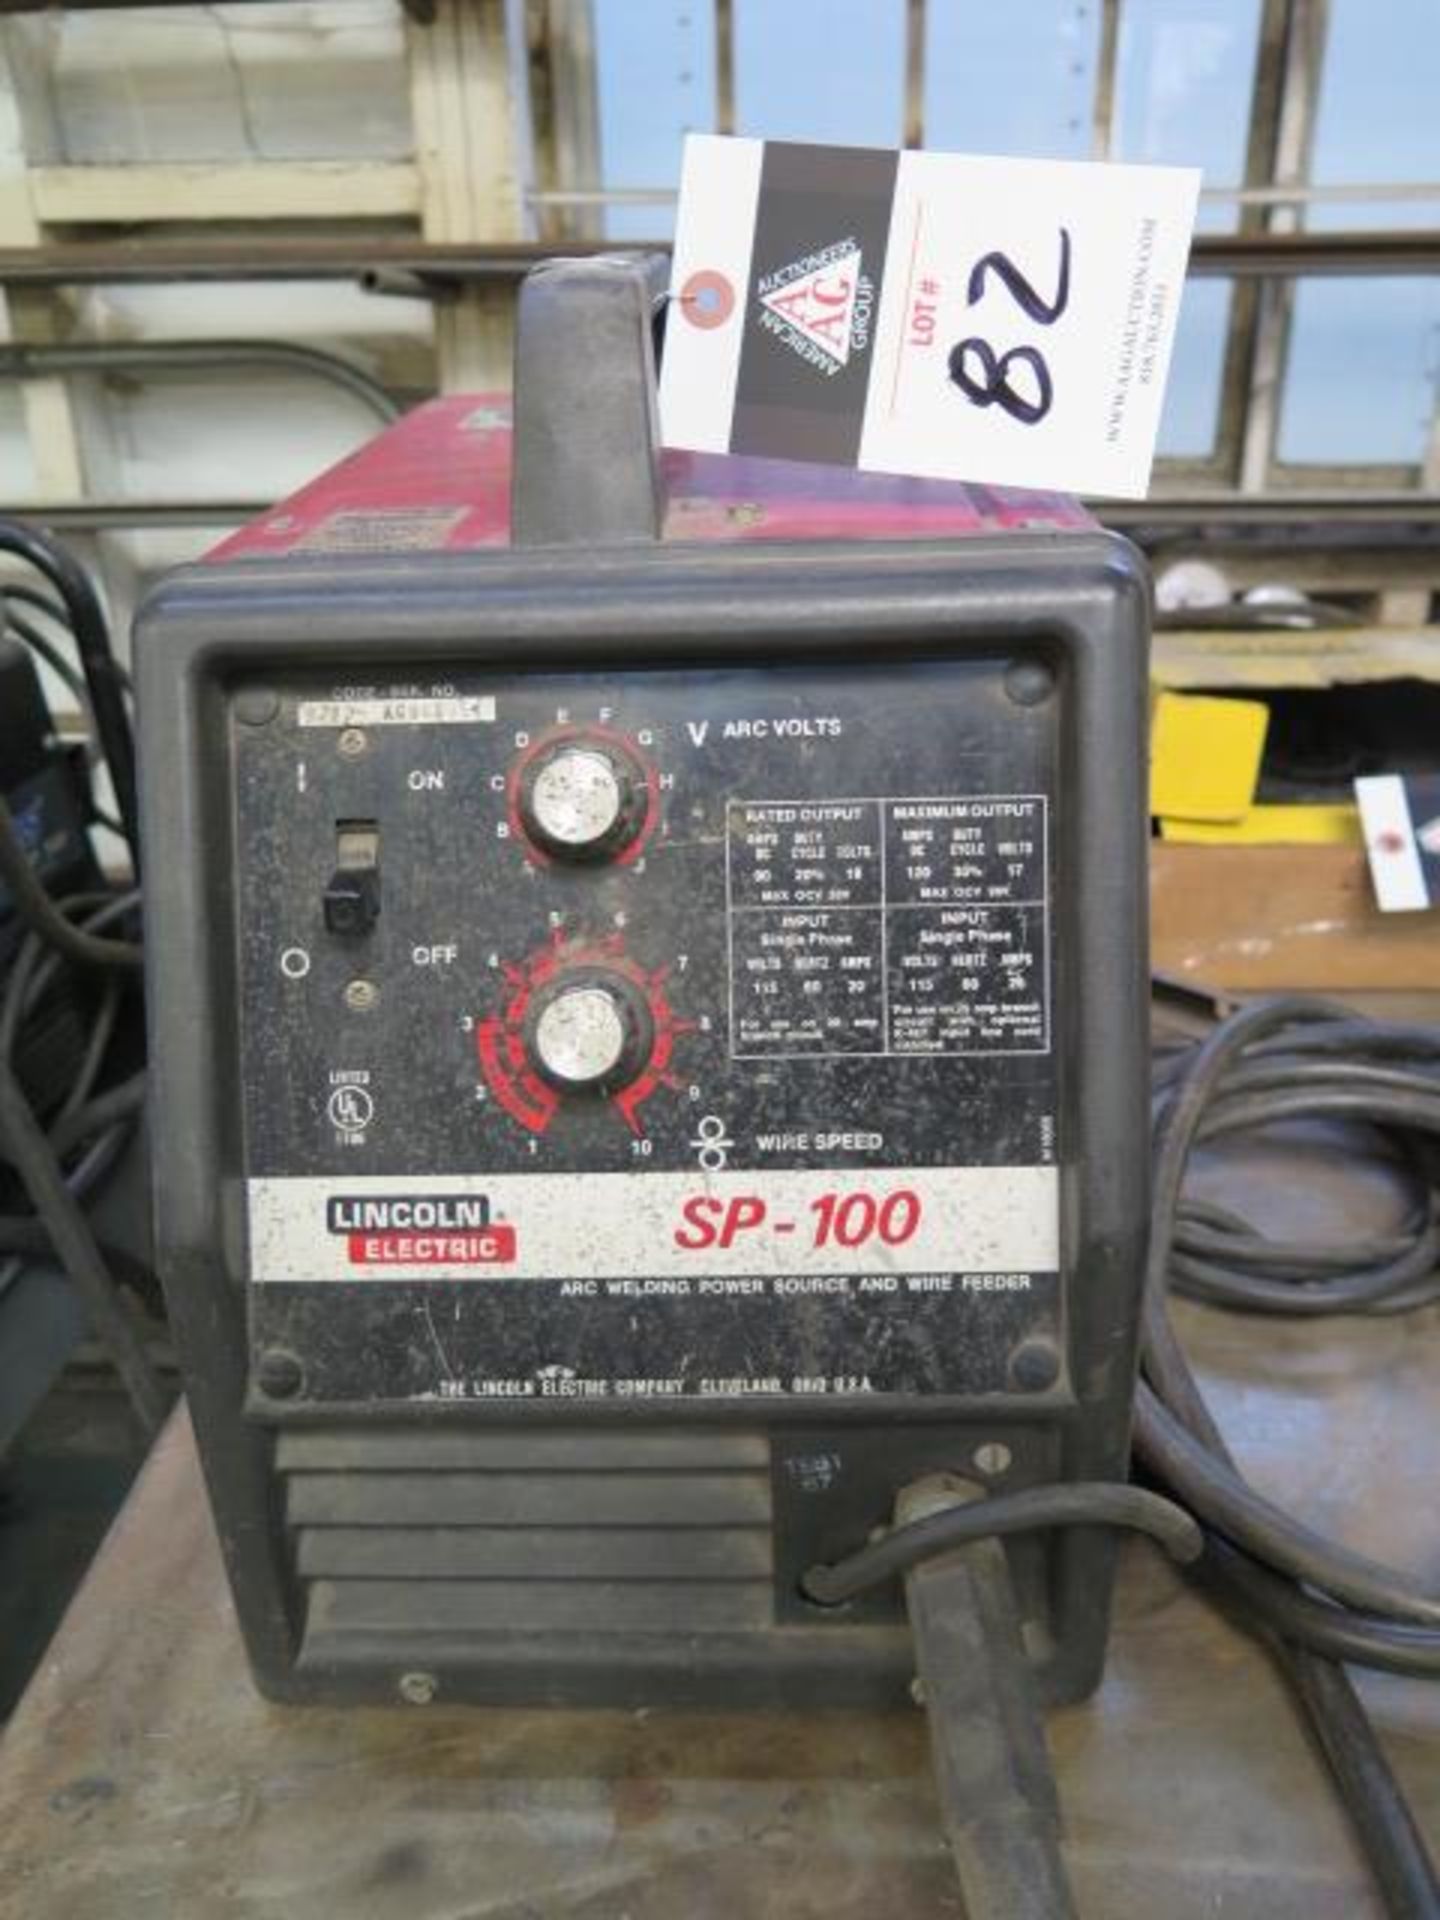 Lincoln SP-100 110 Volt Arc Welding Power Source and Wire Feeder (SOLD AS-IS - NO WARRANTY)